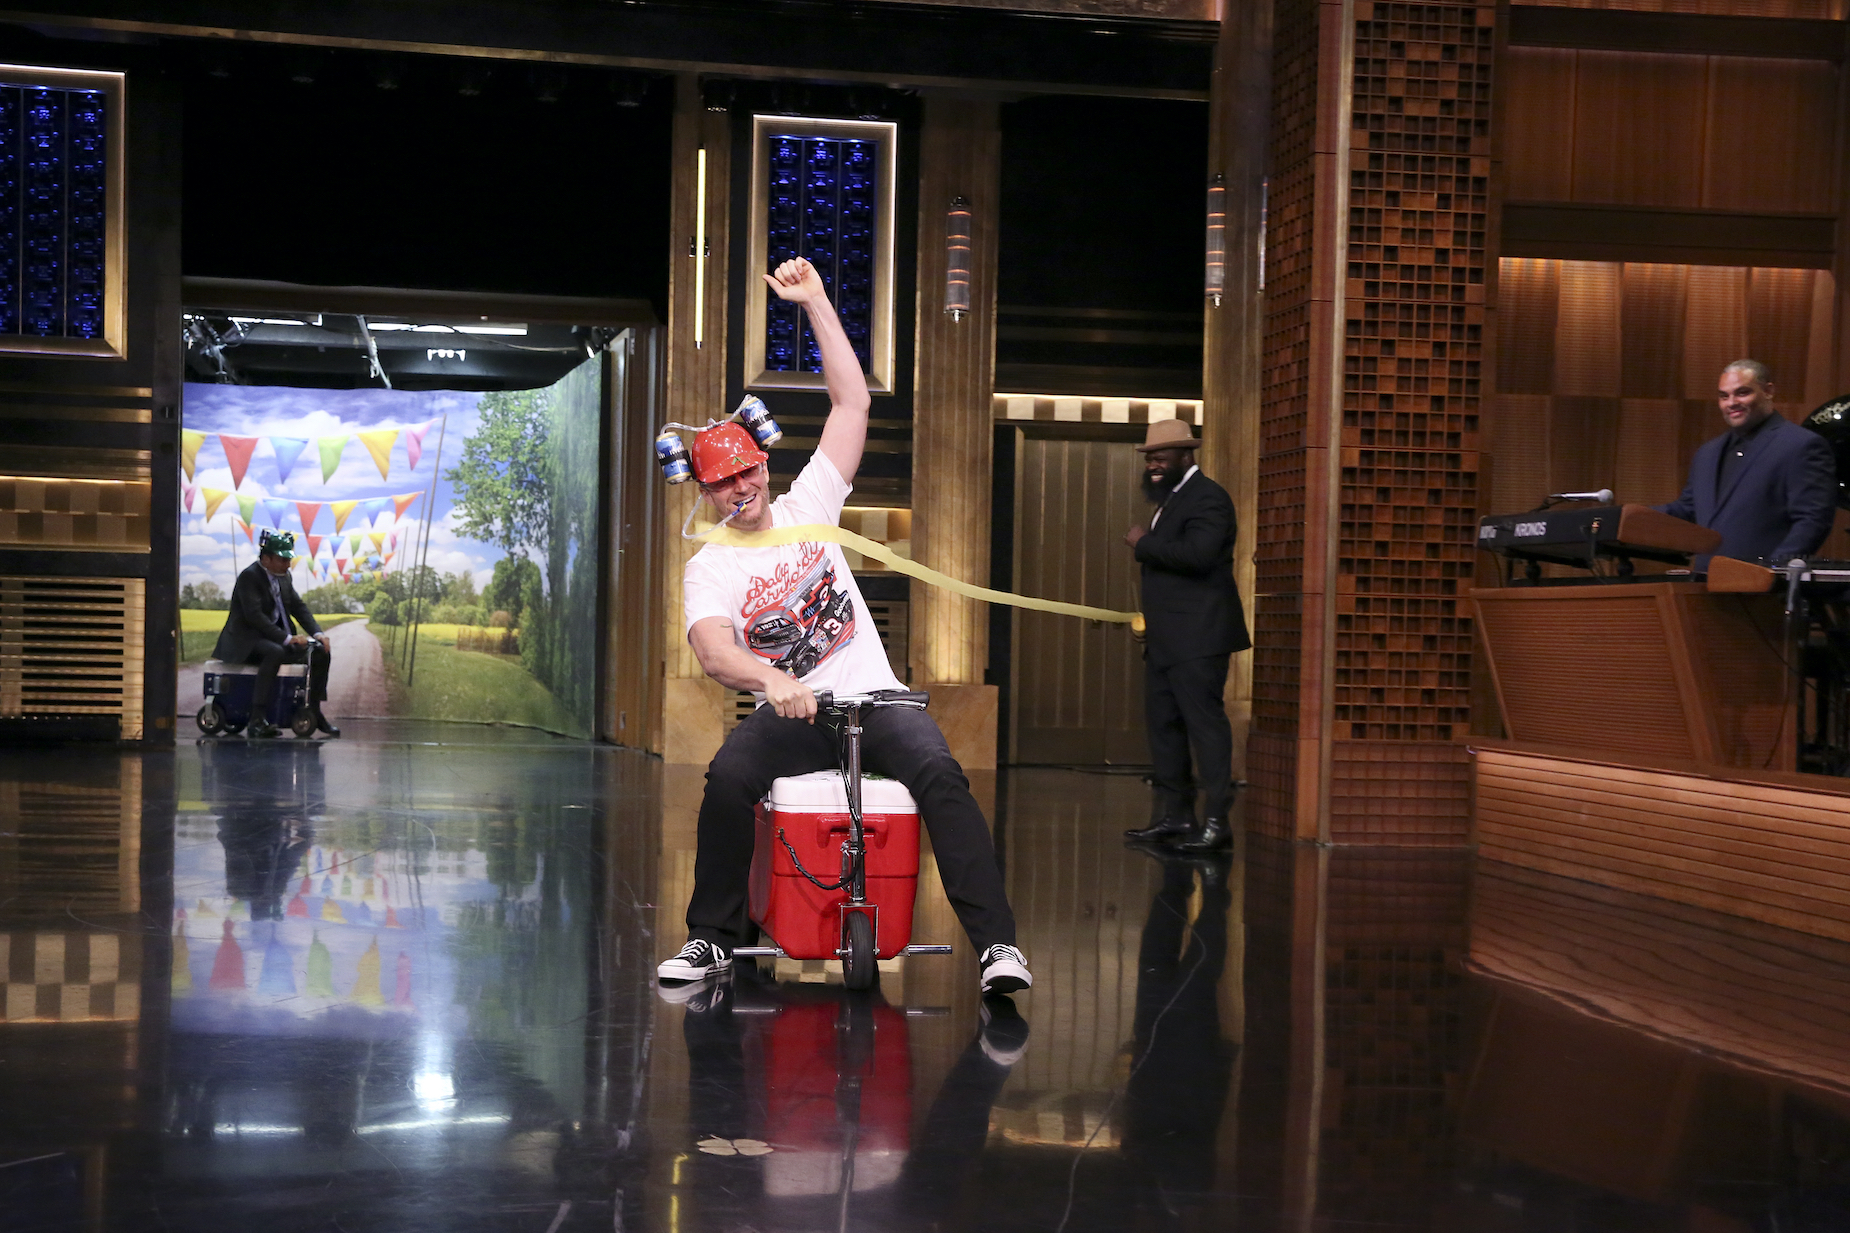 Dale Earnhardt Jr. wins an unconventional race during an appearance on 'The Tonight Show'